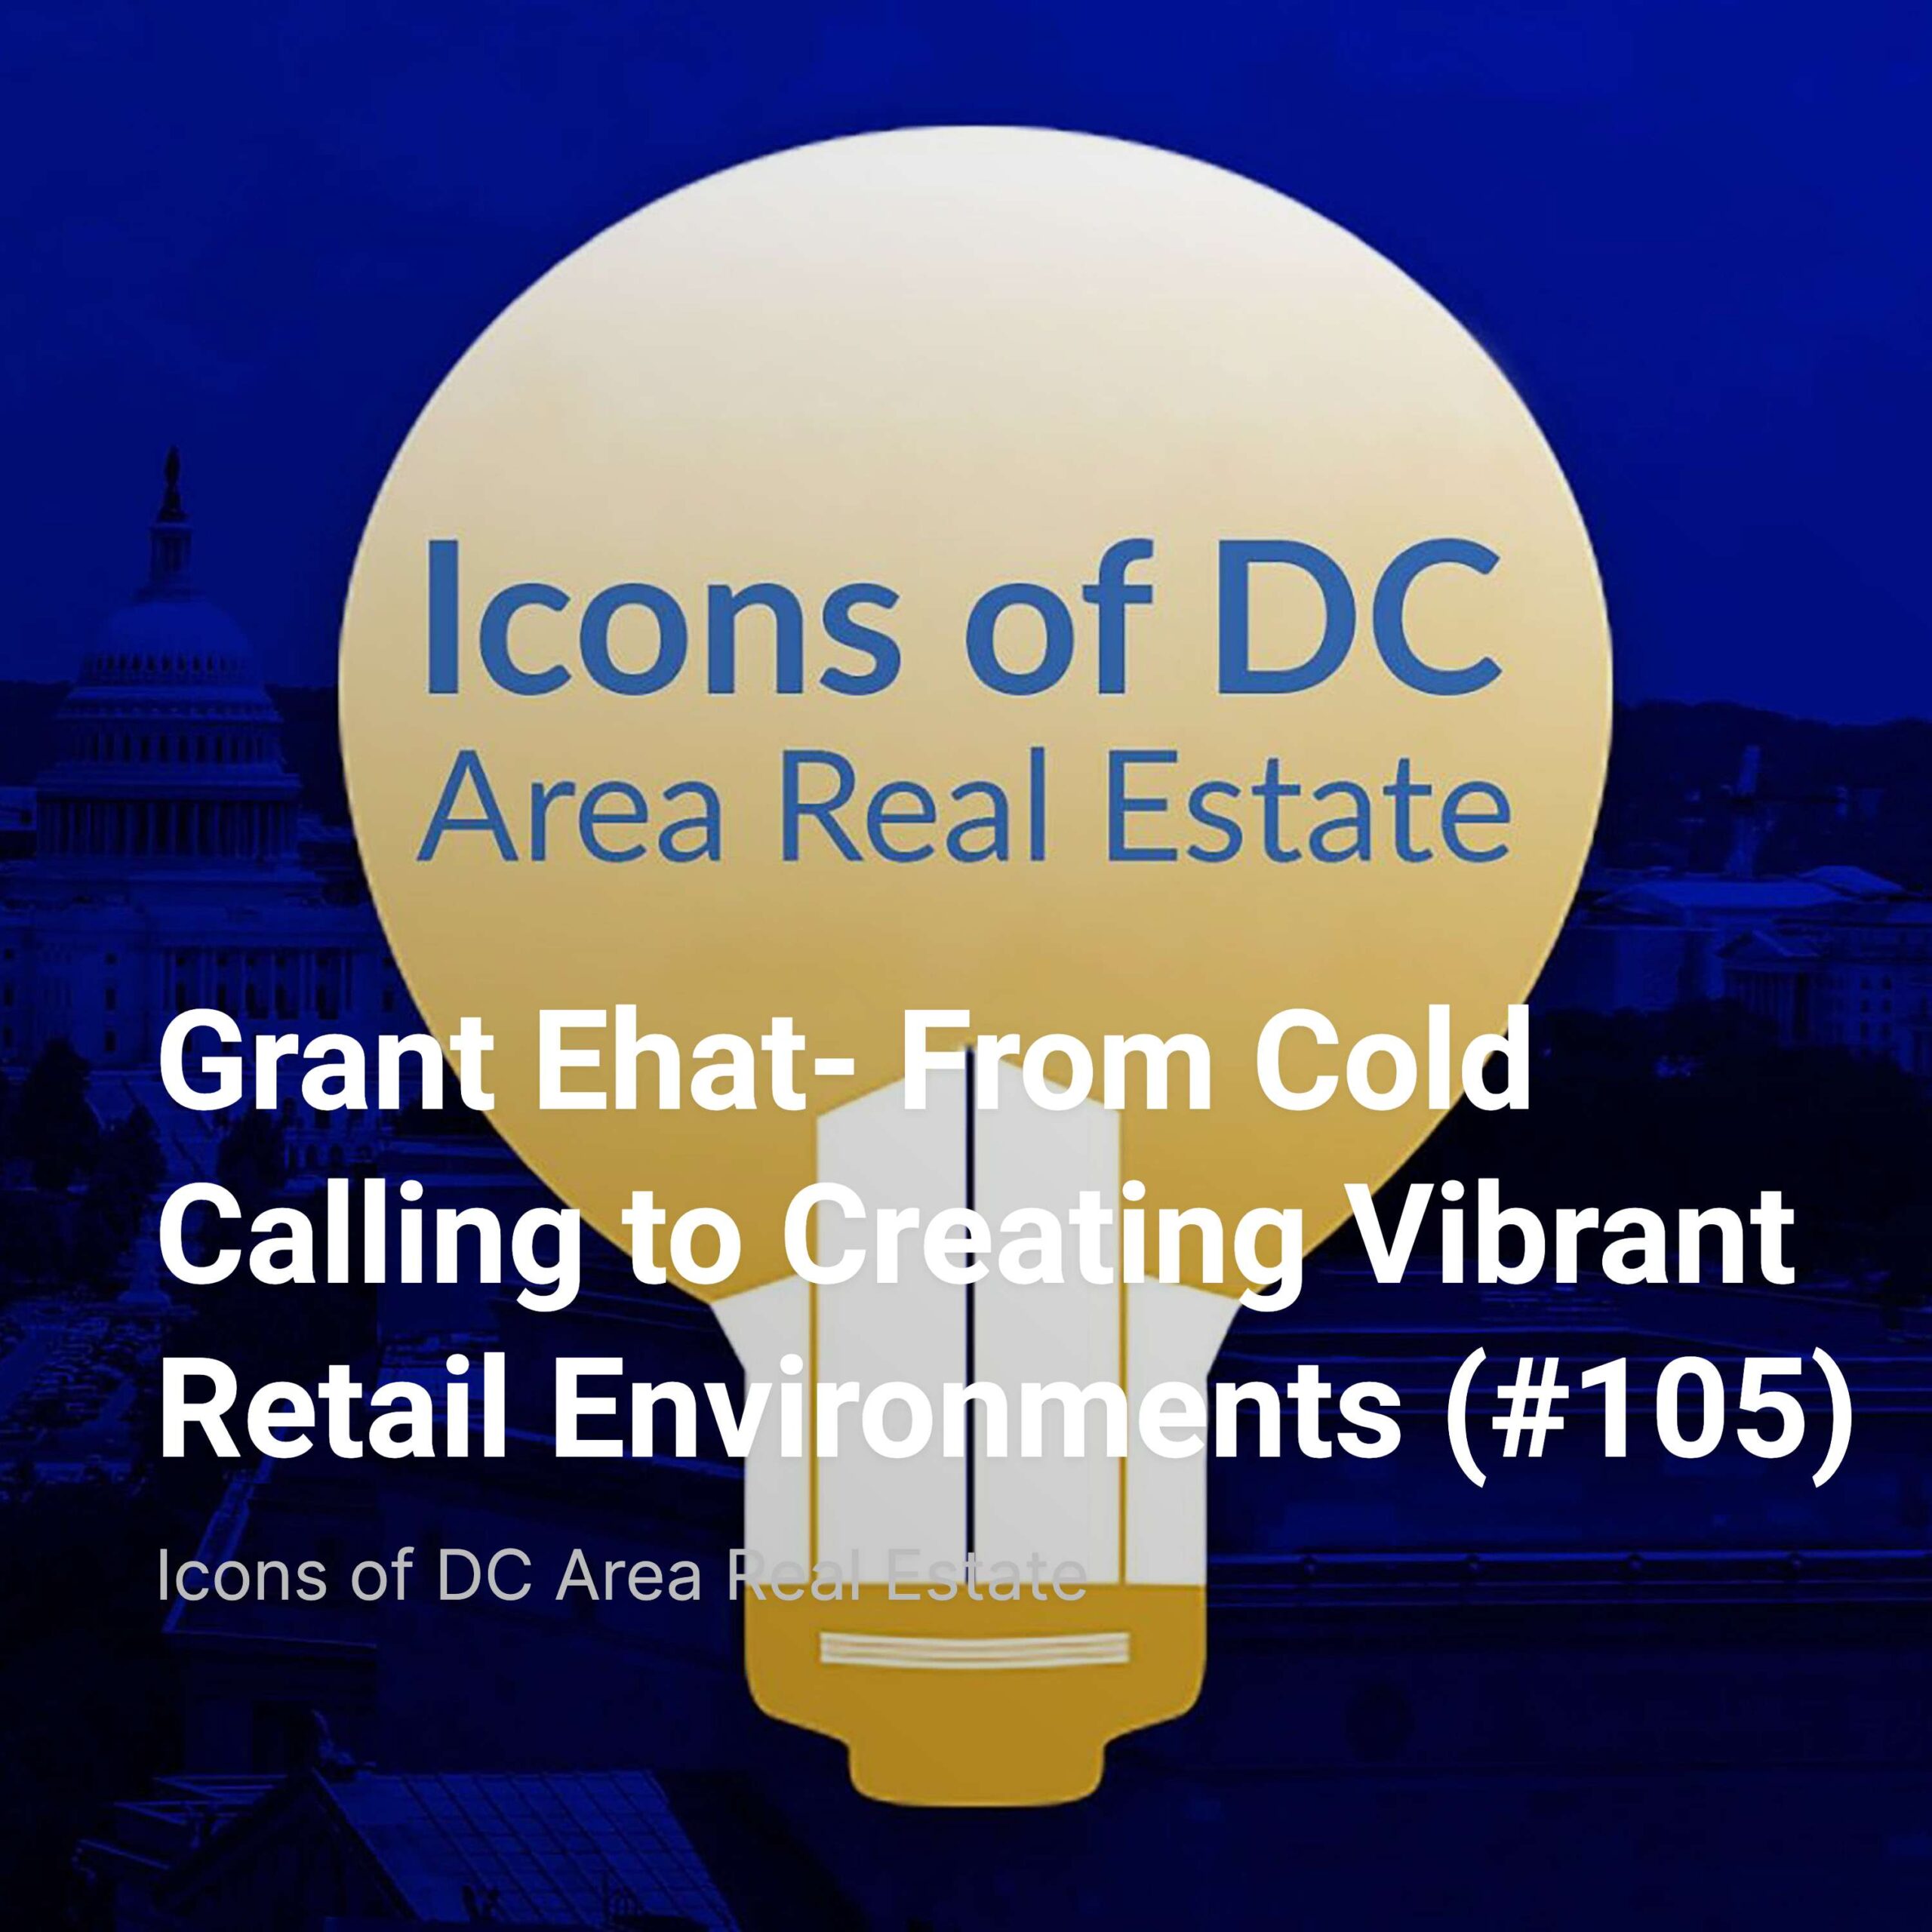 Grant Ehat- From Cold Calling to Creating Vibrant Retail Environments (#105)